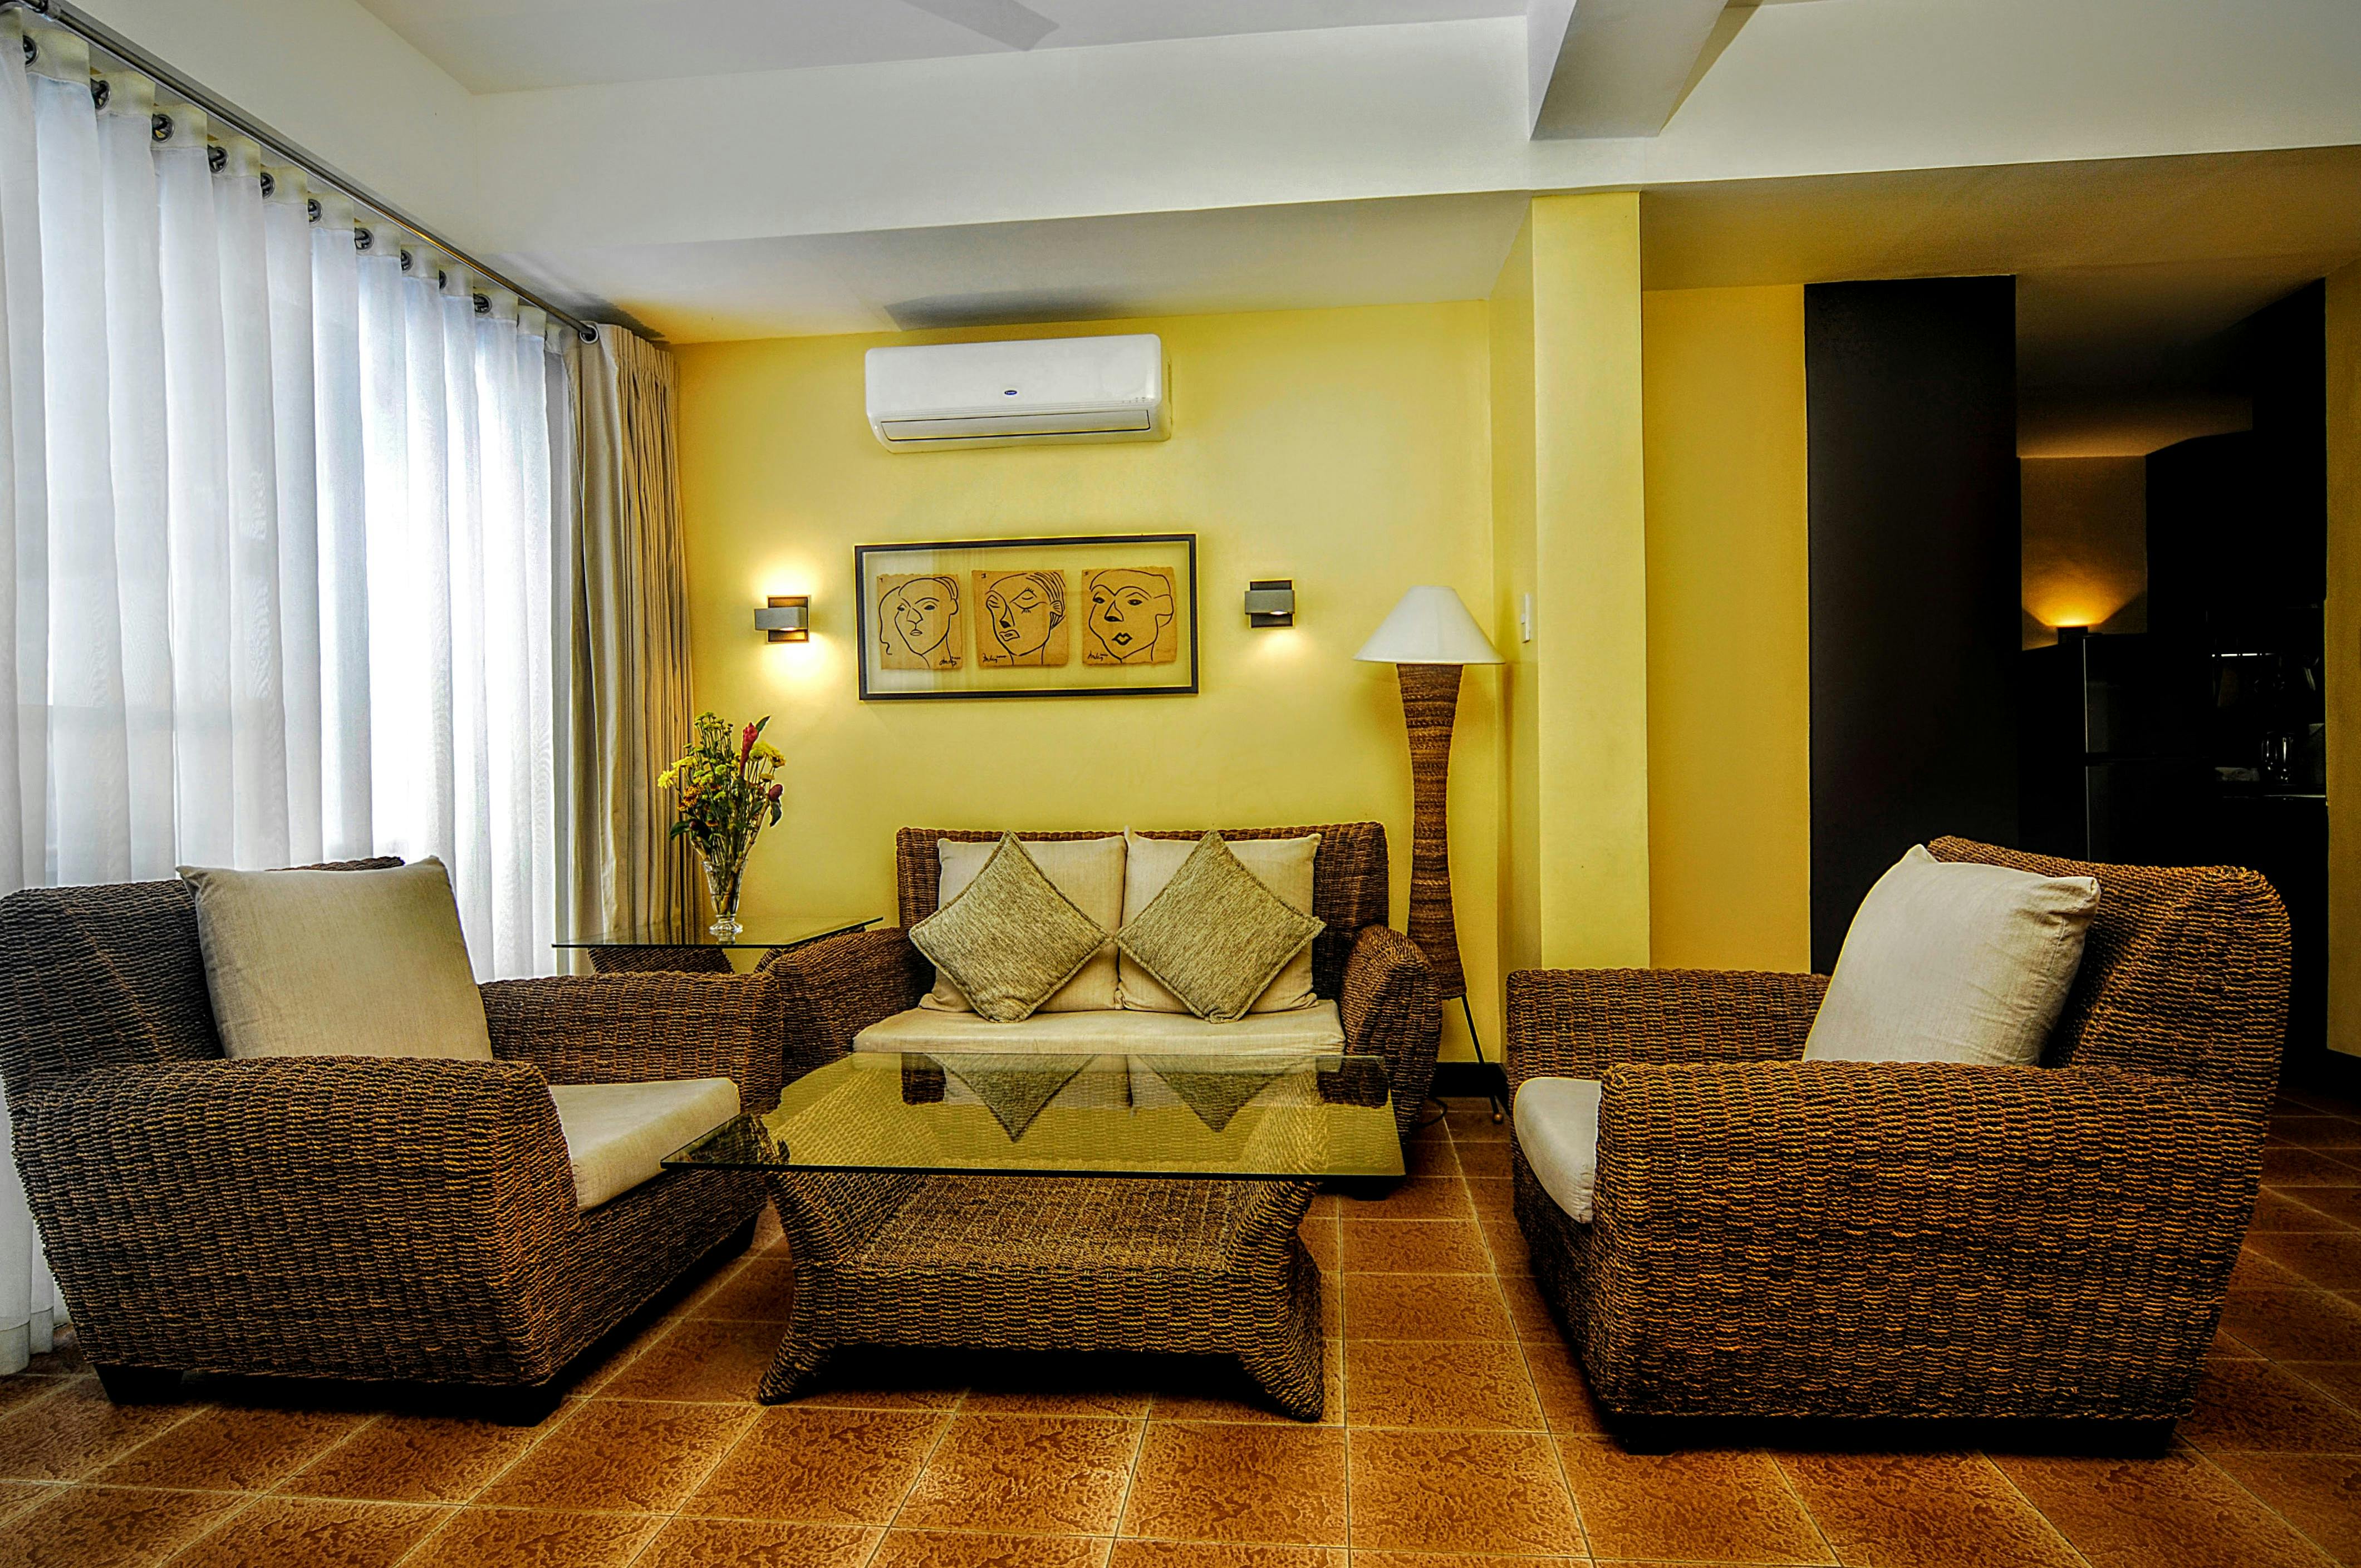 Living room of Maranaw, a 2 bedroom absolute beachfront apartment at Boracay SandCastles The Apartments.